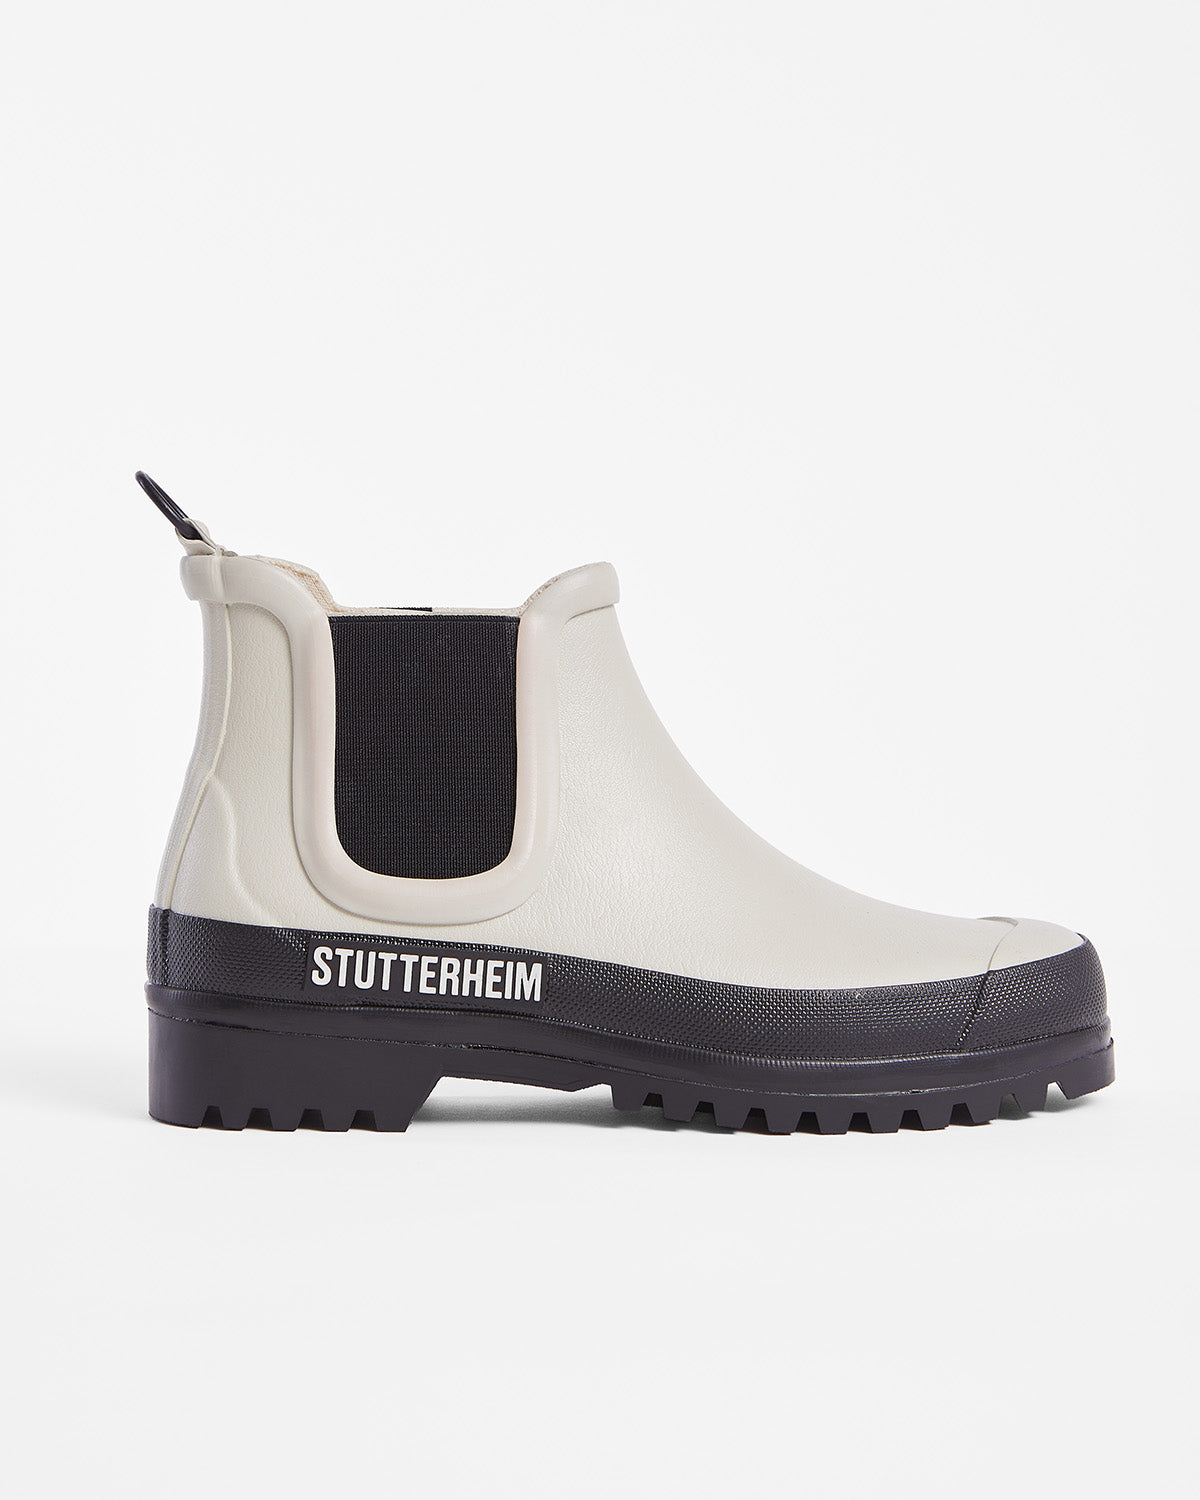 Chelsea Rainboots in color Oyster with black sole by Ilse Jacobsen